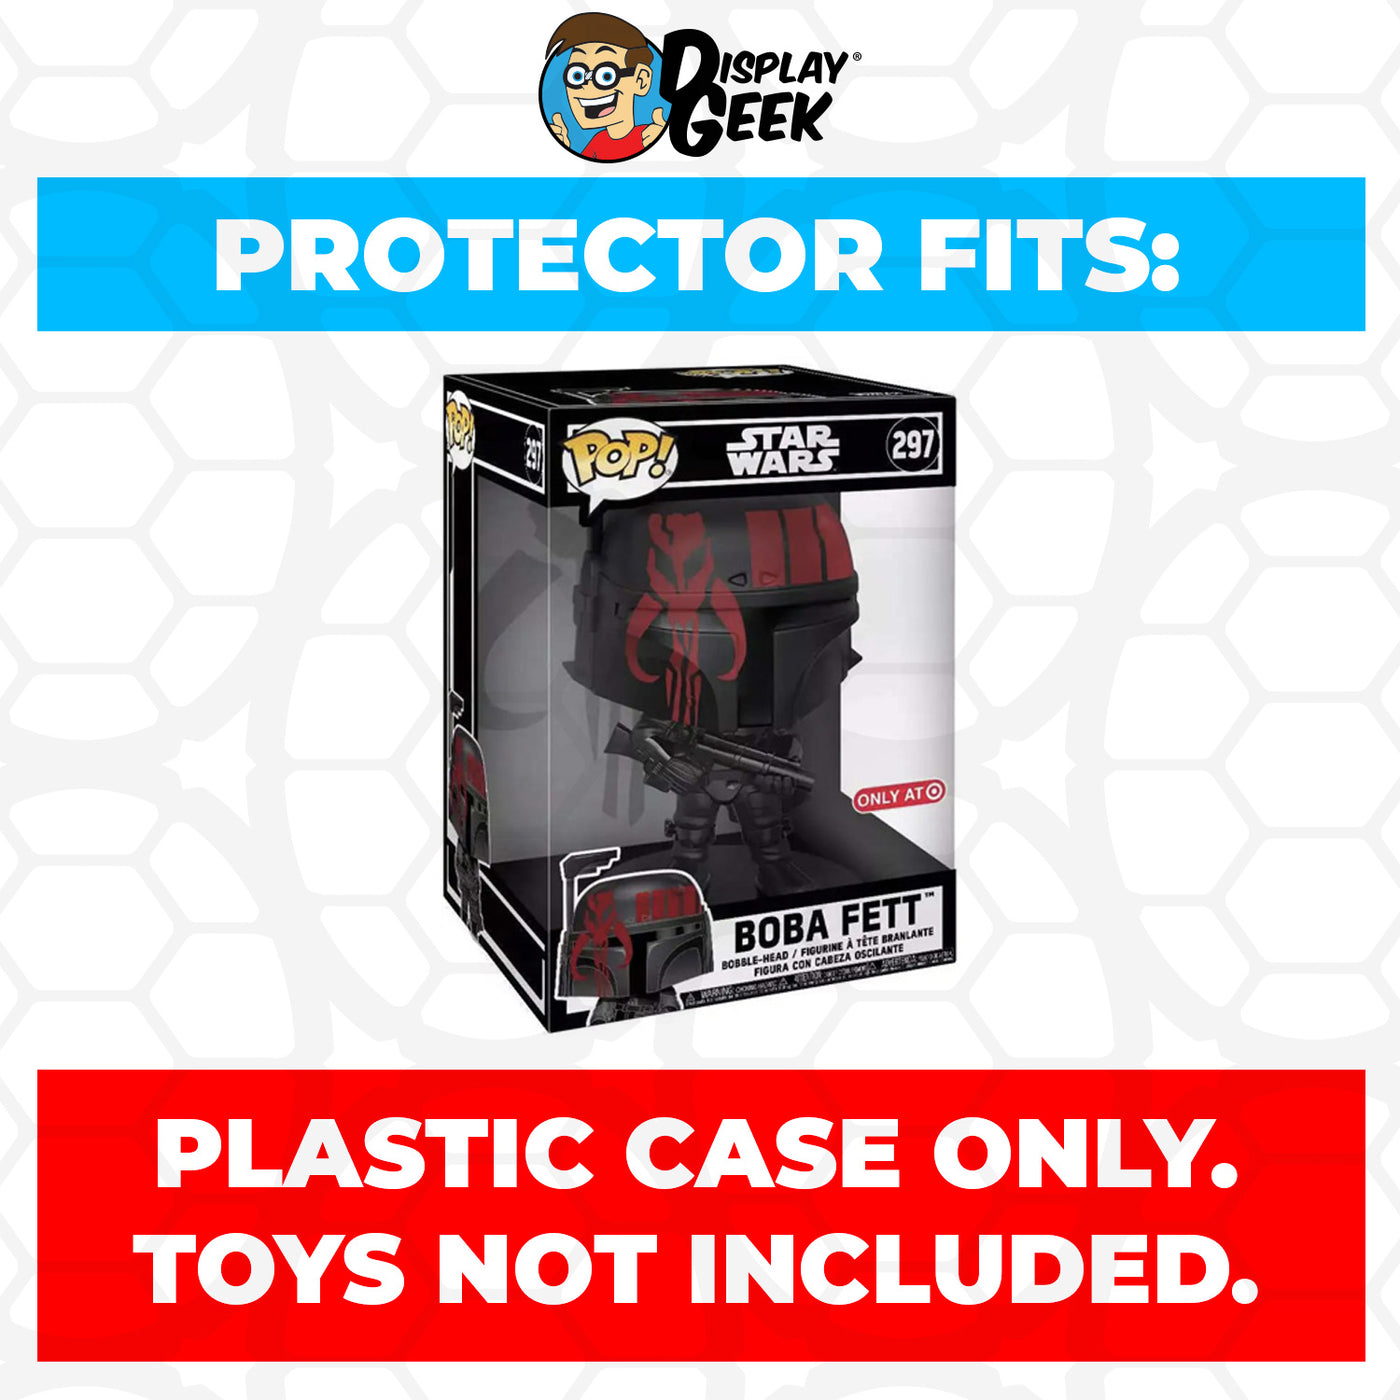 Pop Protector for 10 inch Boba Fett Futura Black #297 Jumbo Funko Pop on The Protector Guide App by Display Geek